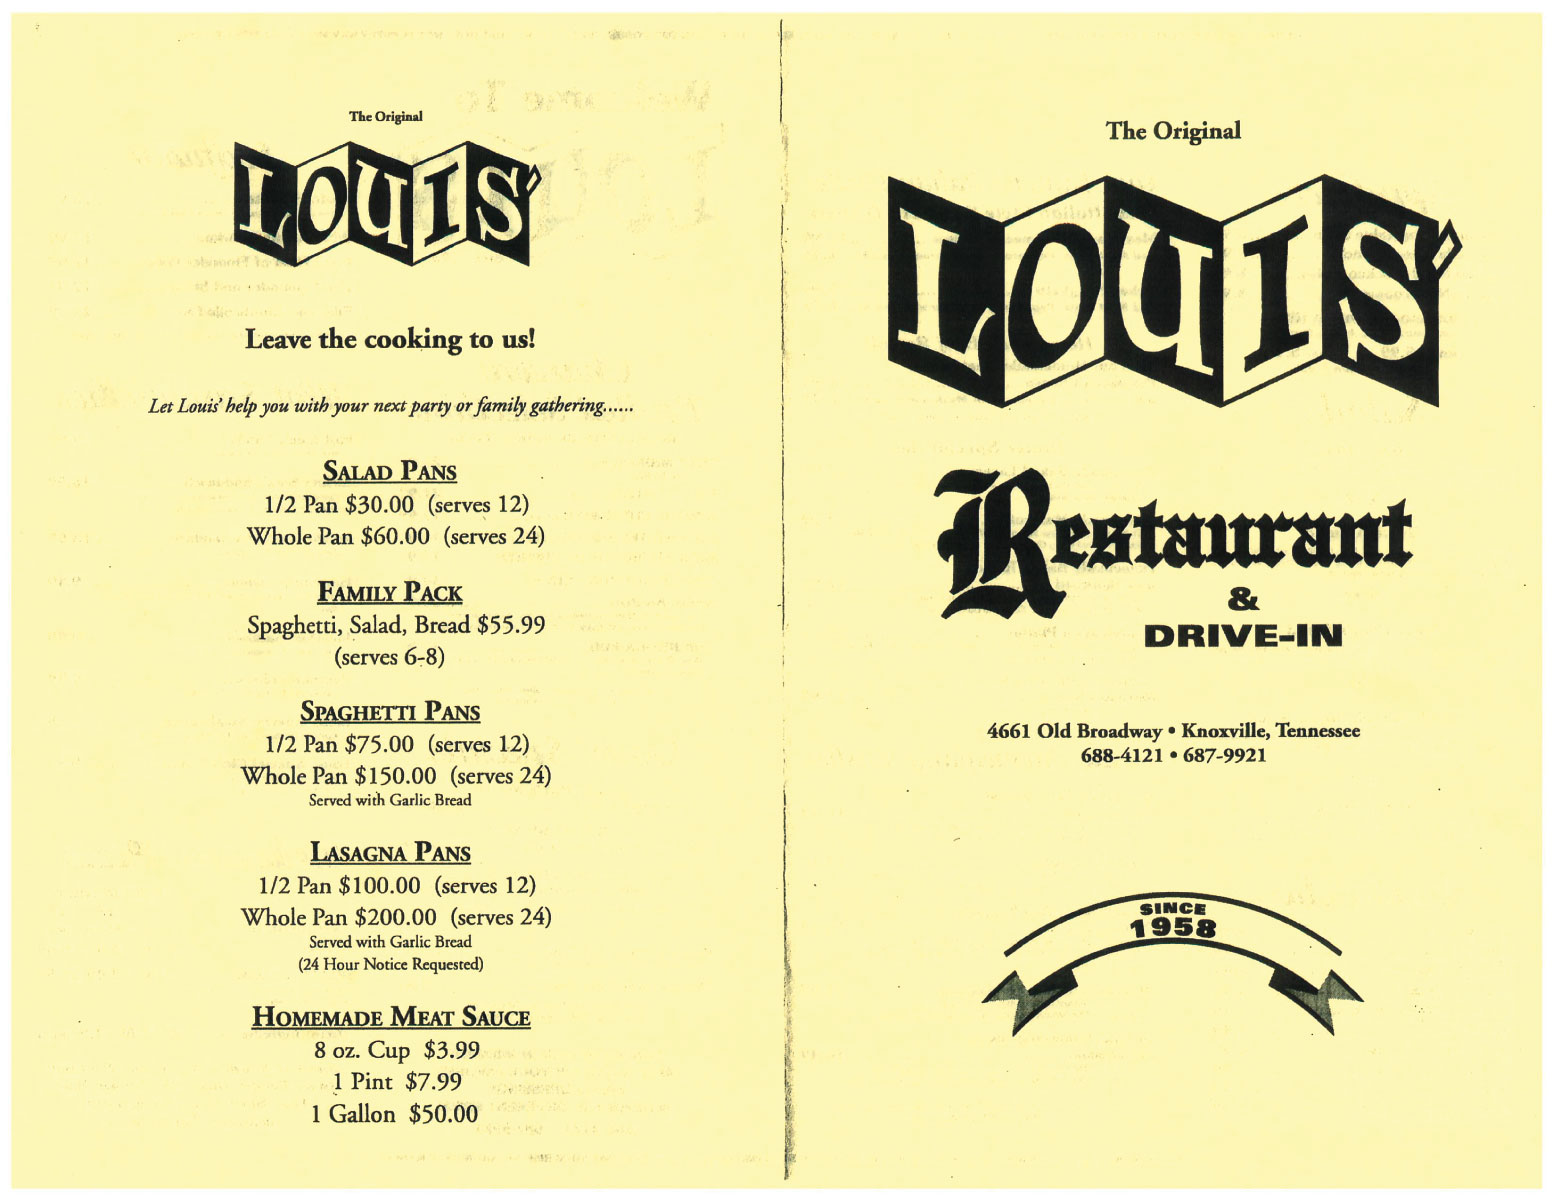 The Original Louis Restaurant Knoxville TN | Knoxville ...